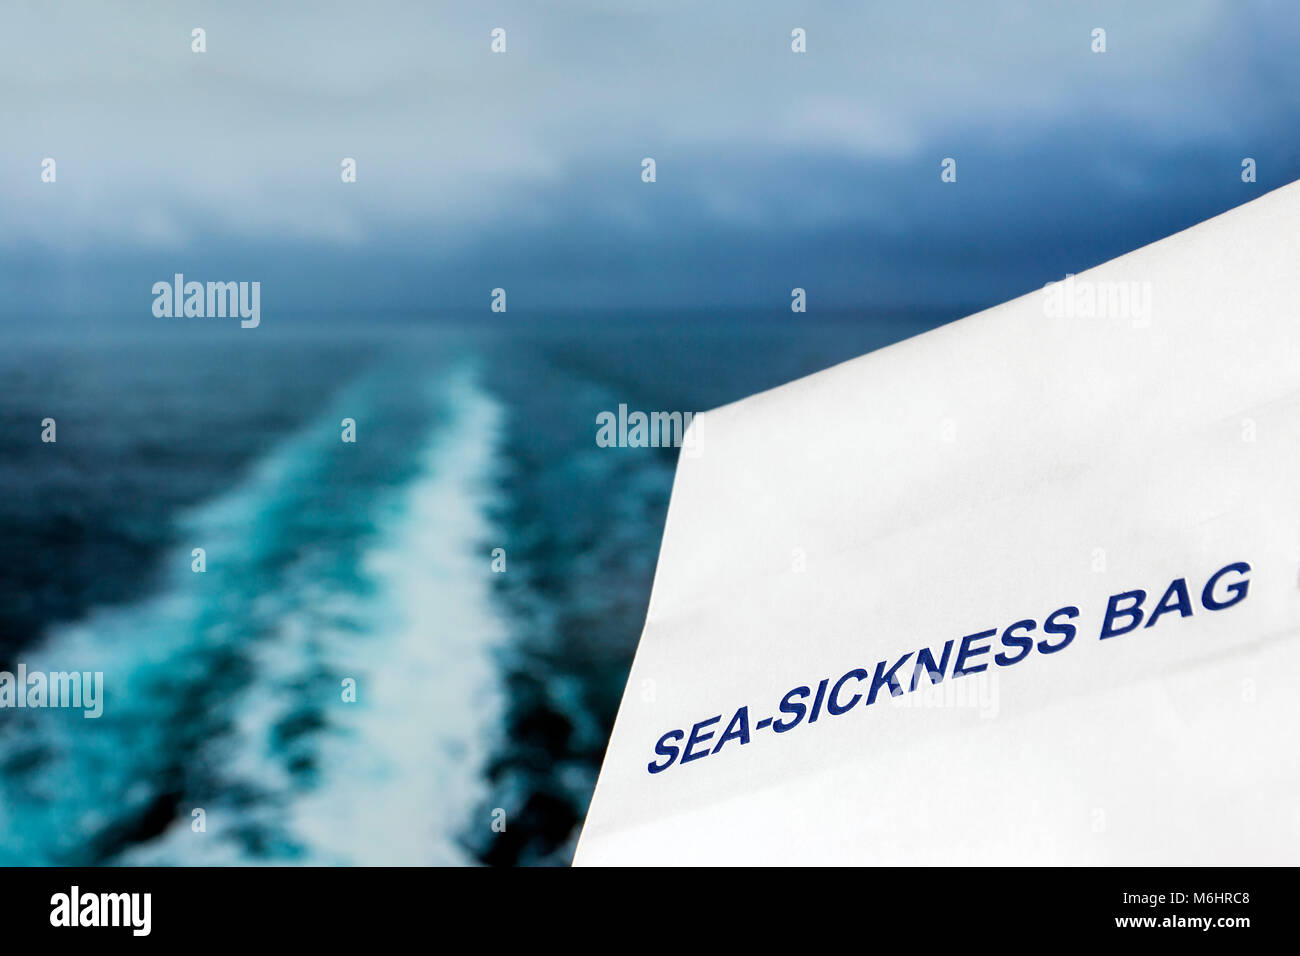 Sea sickness bag against a stormy ocean background with wake from a ship and a shallow depth of field Stock Photo